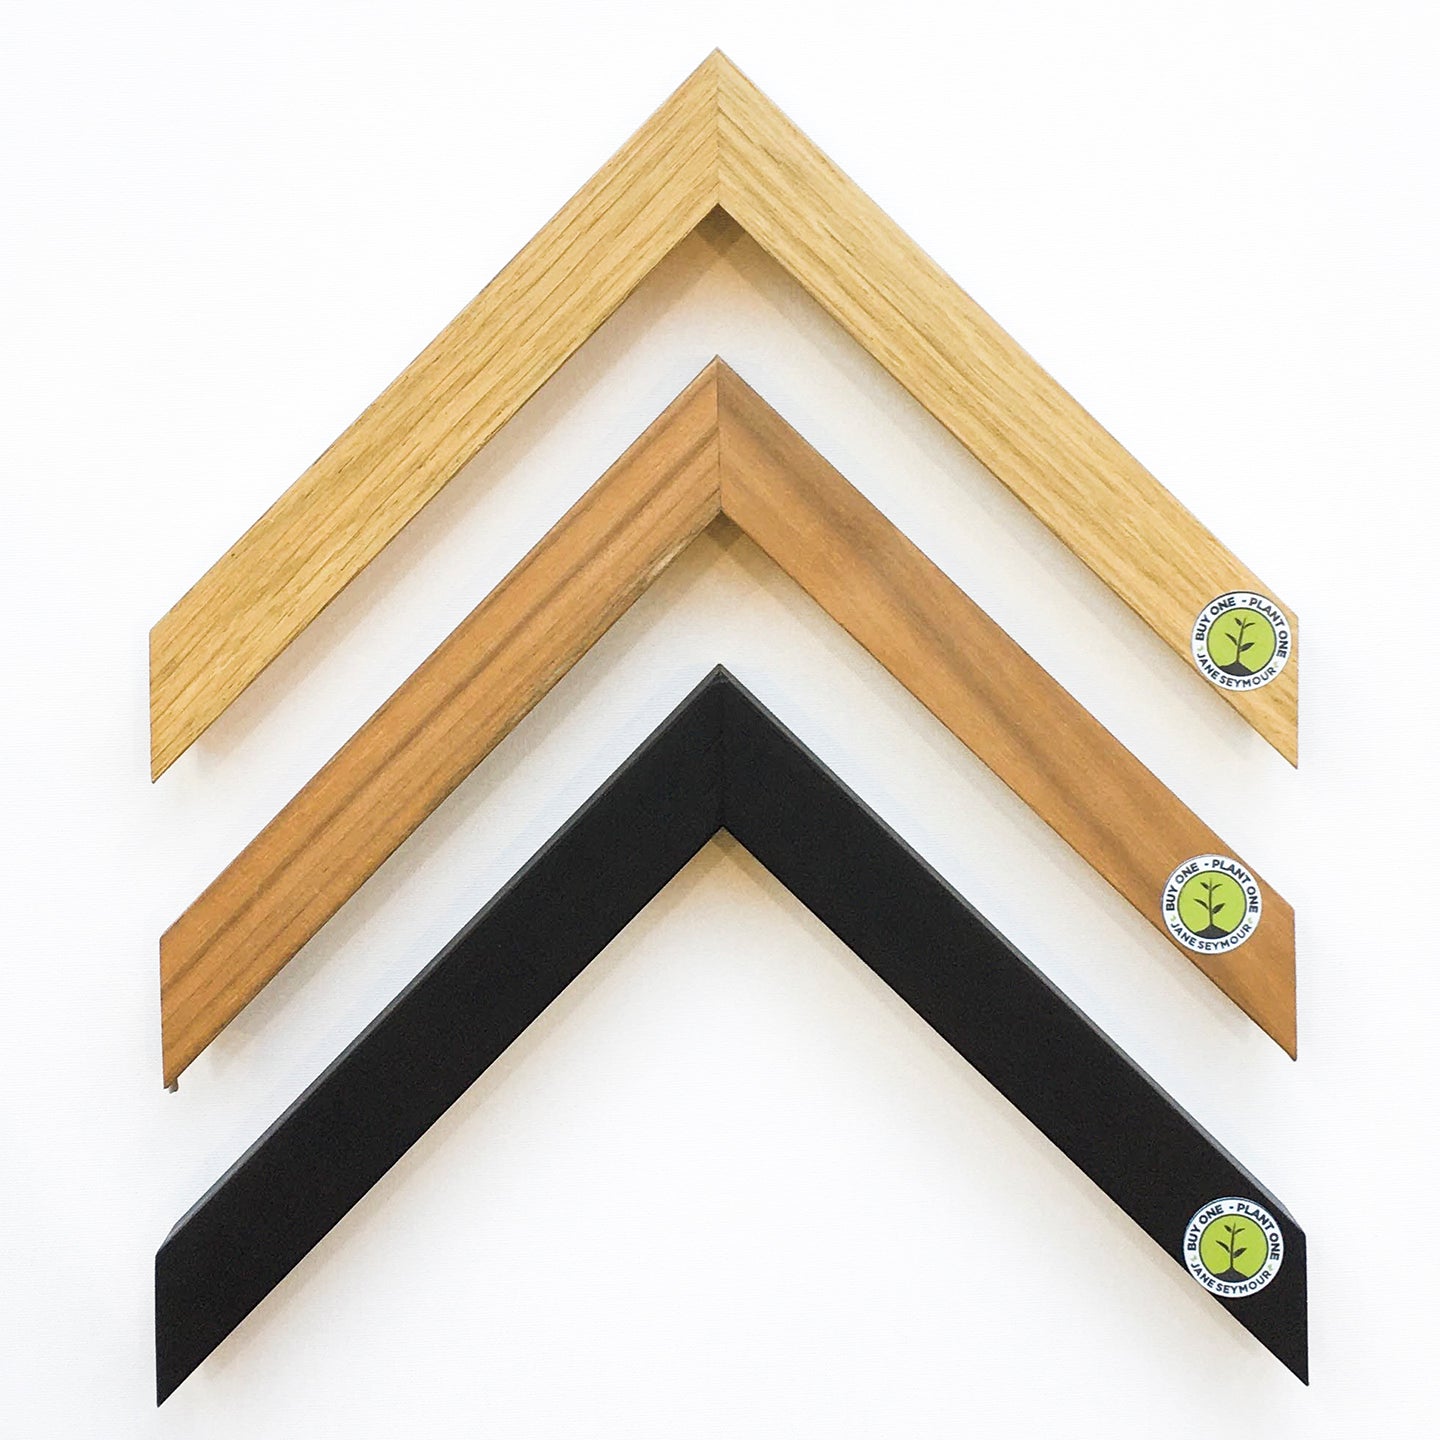 Frame choices include a natural, walnut or black stained 3/4 inch wood moulding from the Jane Seymour (of “Somewhere in Time” fame) Moulding Collection by FOTIOU, which contributes to a reforestation initiative with every purchase. The pine wood frames are responsibly sourced and manufactured with Forest Stewardship Council Certification.